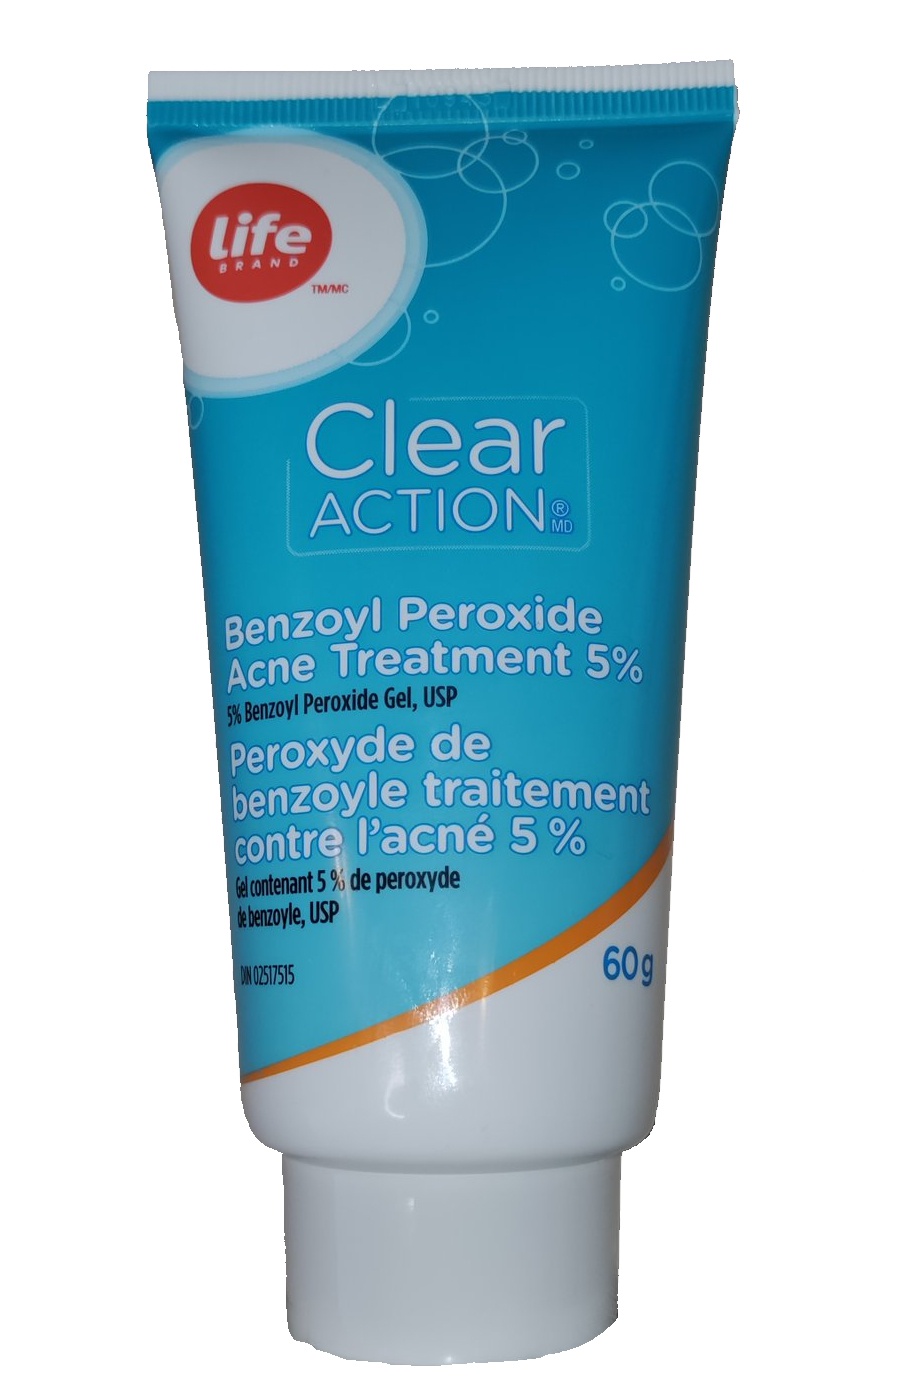 Life Brand Clear Action Benzoyl Peroxide Acne Treatment 5%